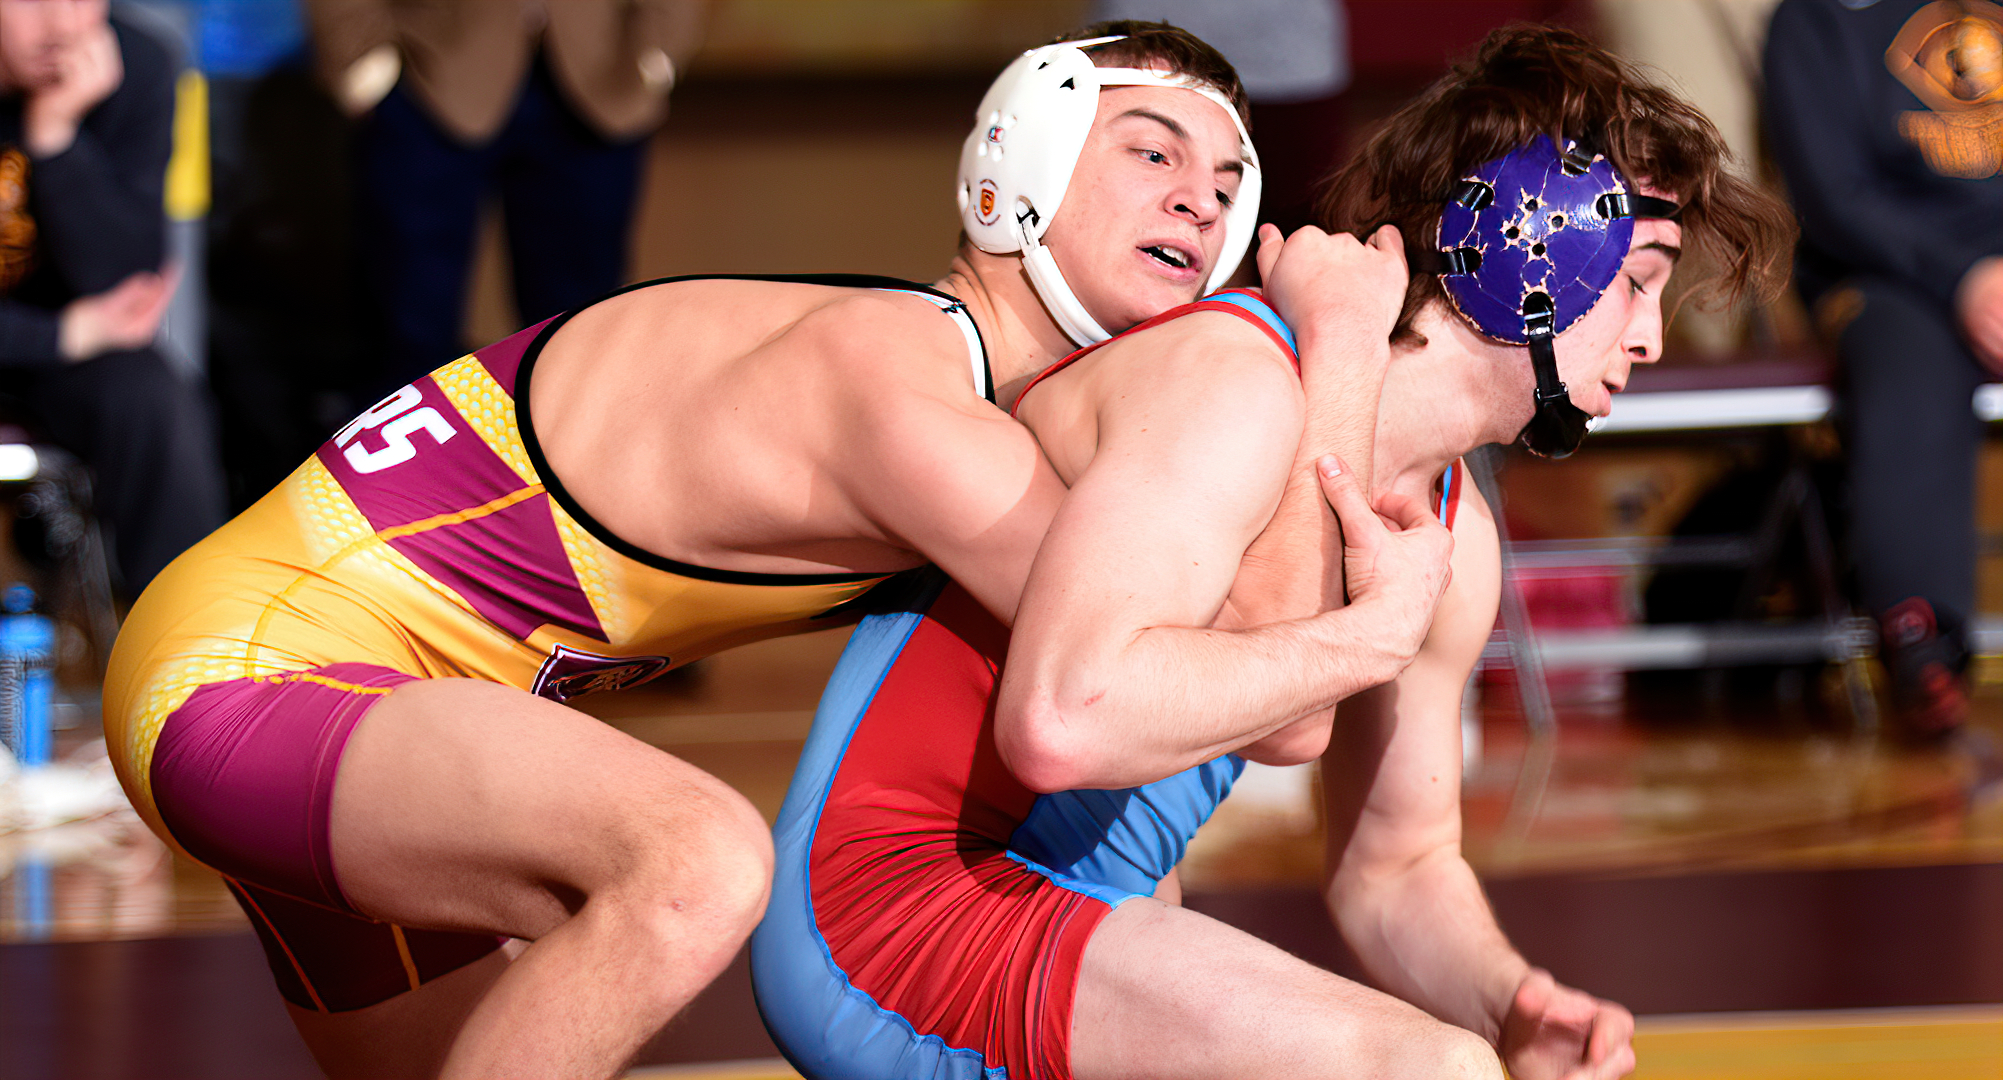 Senior Bret Wilson scored one of the two wins by pin in the Cobbers' 47-0 win at St. John's. Wilson picked up his 43rd career win.